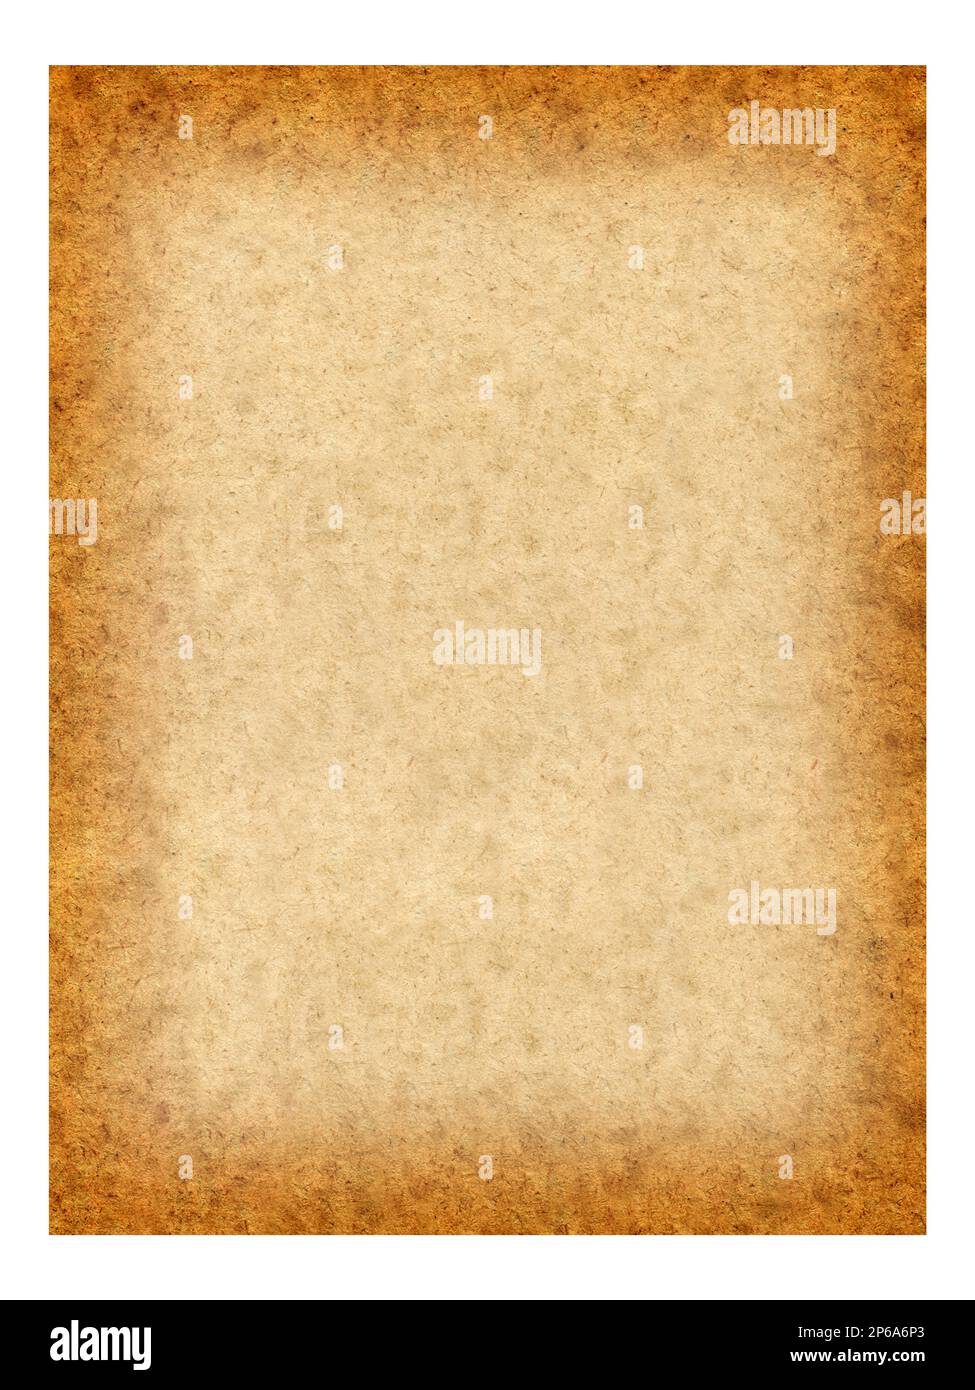 https://c8.alamy.com/comp/2P6A6P3/old-paper-texture-on-white-old-paper-parchment-texture-in-high-resolution-2P6A6P3.jpg